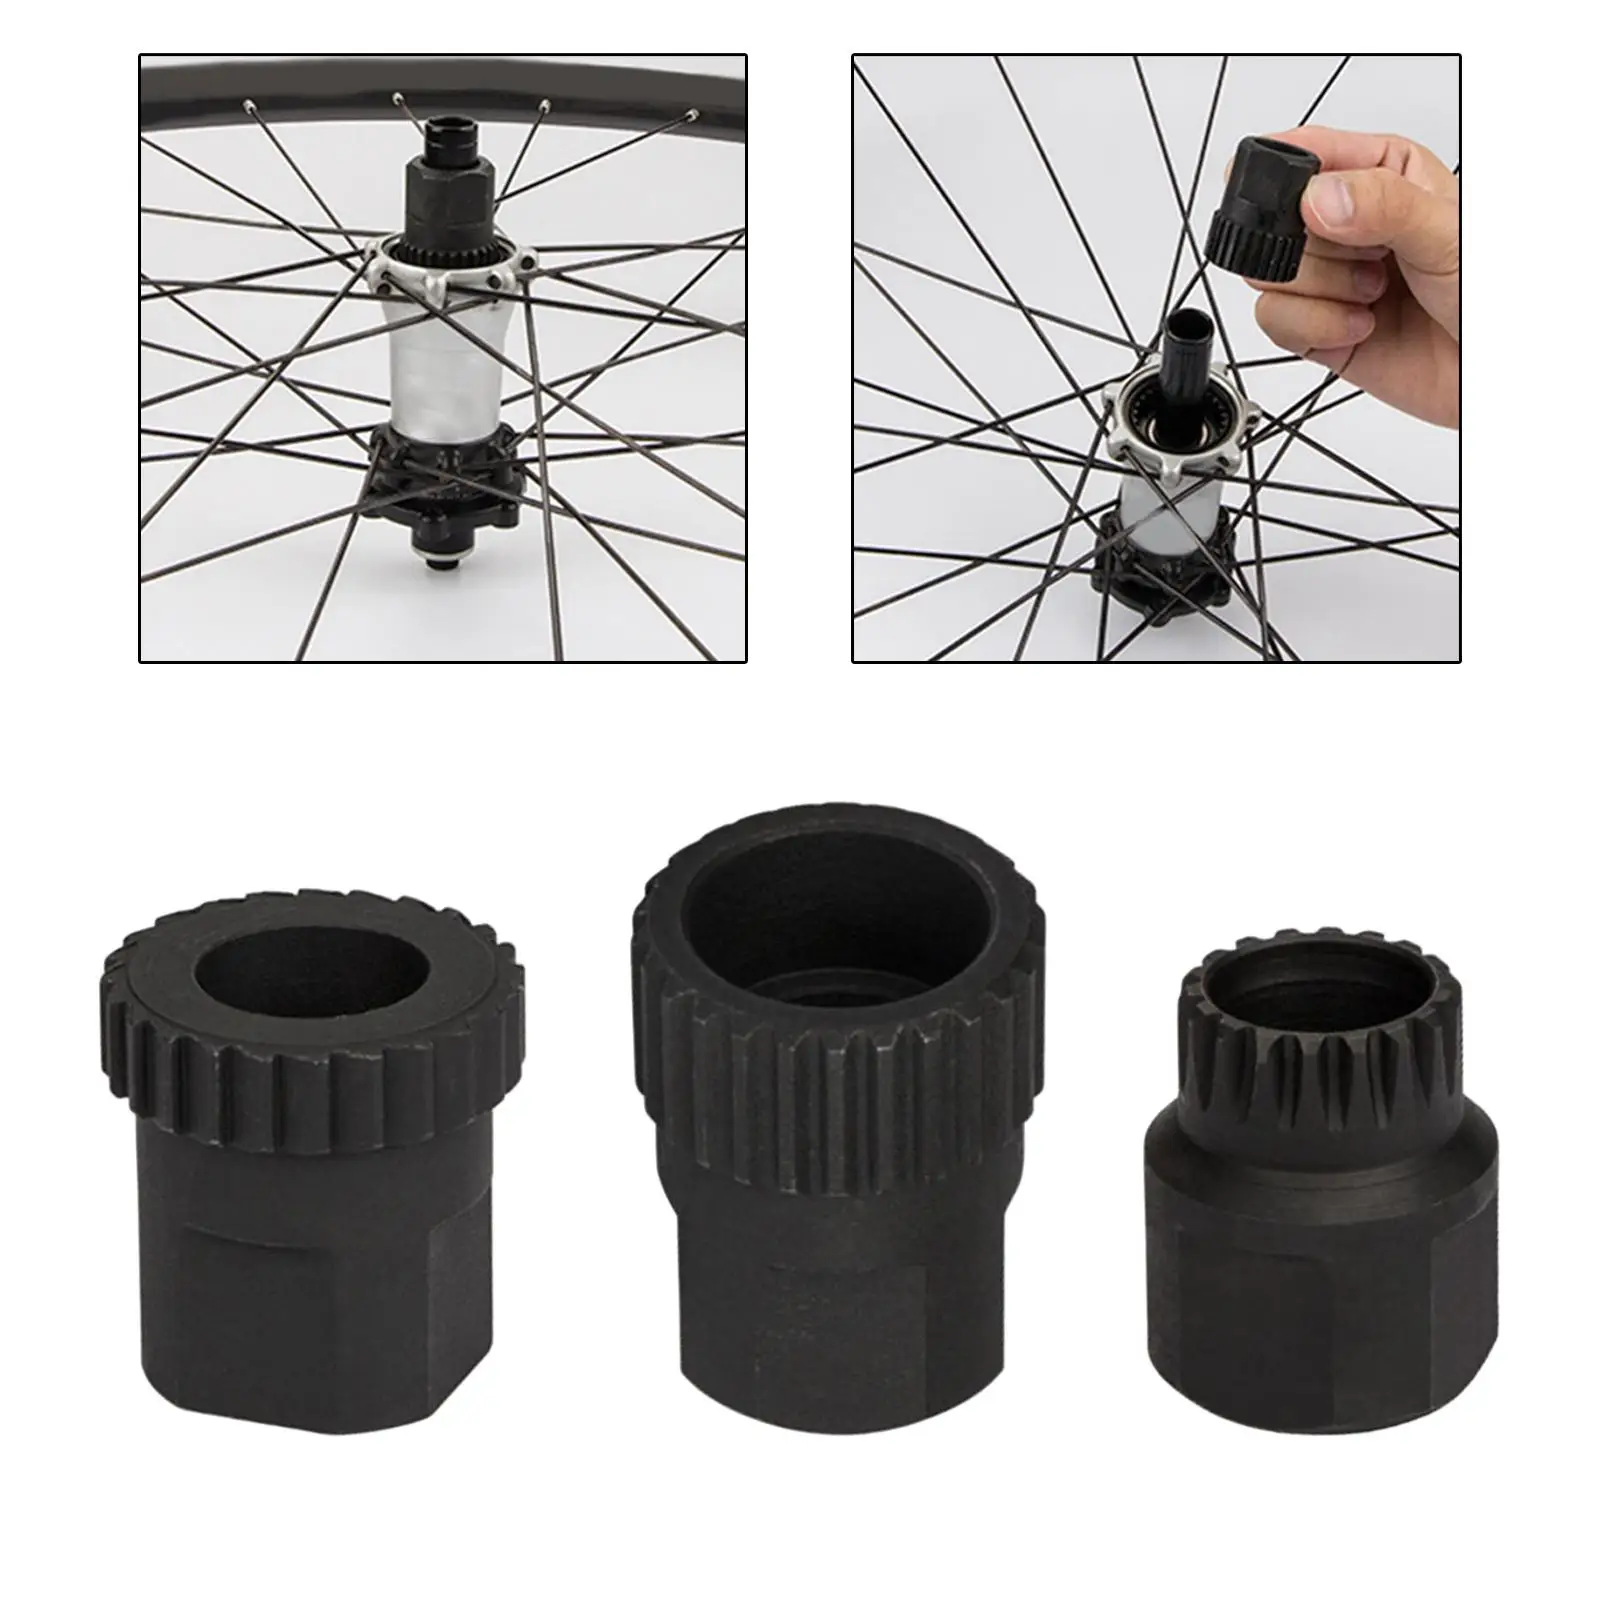 Professional Bicycle Wheel Hub Body Disassembly Tool Adjustable Ratchet Installer Detachable for Mountain Bike Repair Tool